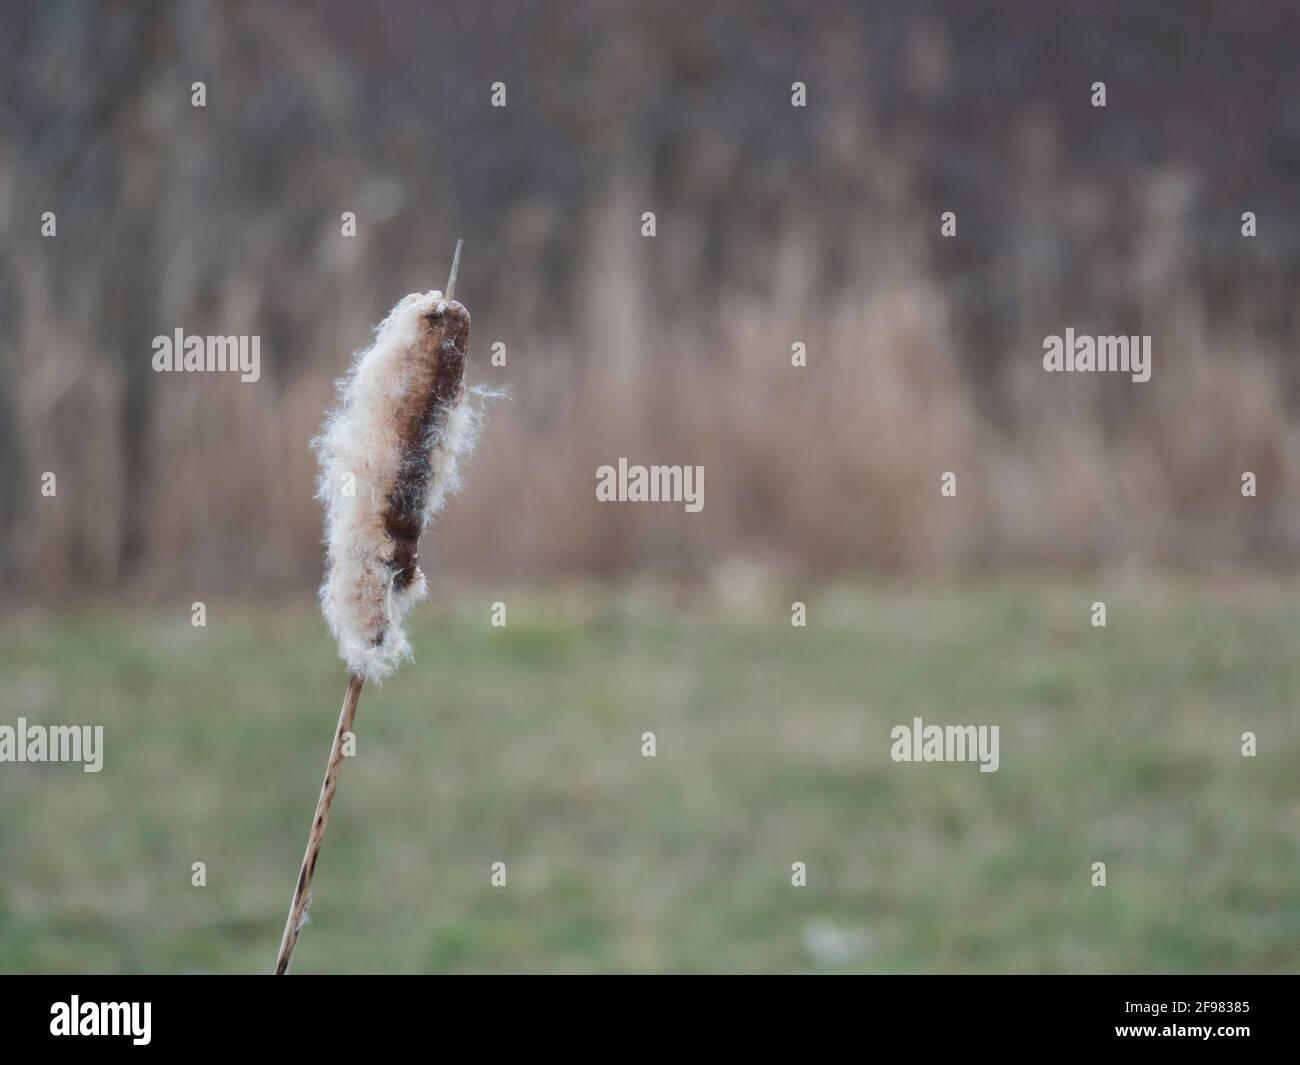 Close up Bulrush or Typha latifolia plants against natural green and reeds bokeh background copy space Stock Photo